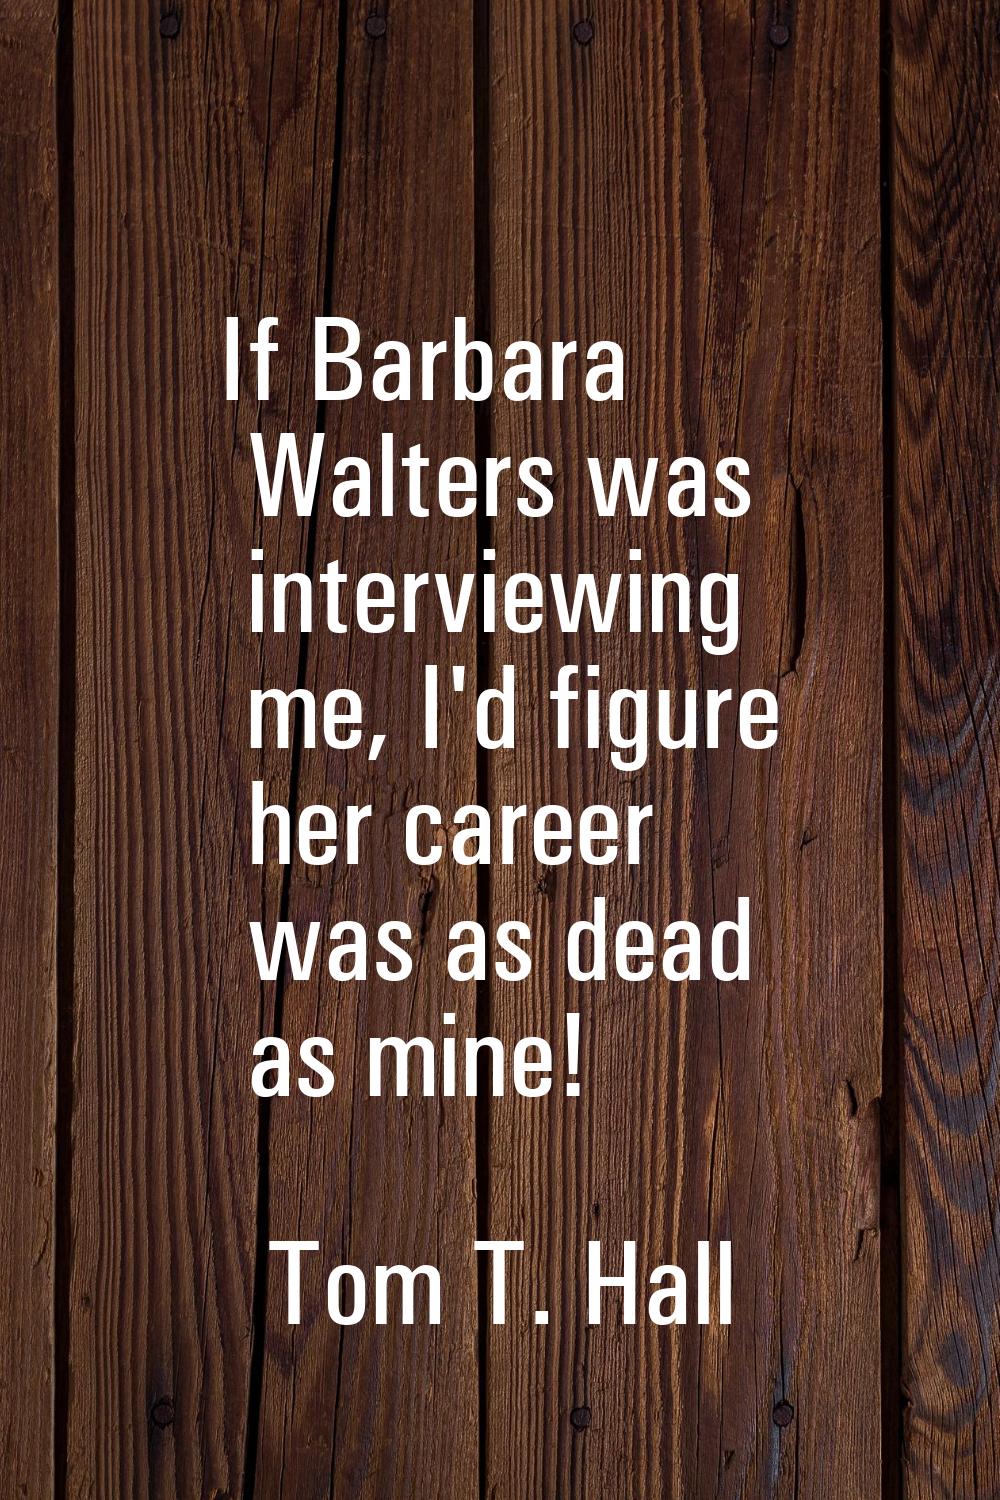 If Barbara Walters was interviewing me, I'd figure her career was as dead as mine!